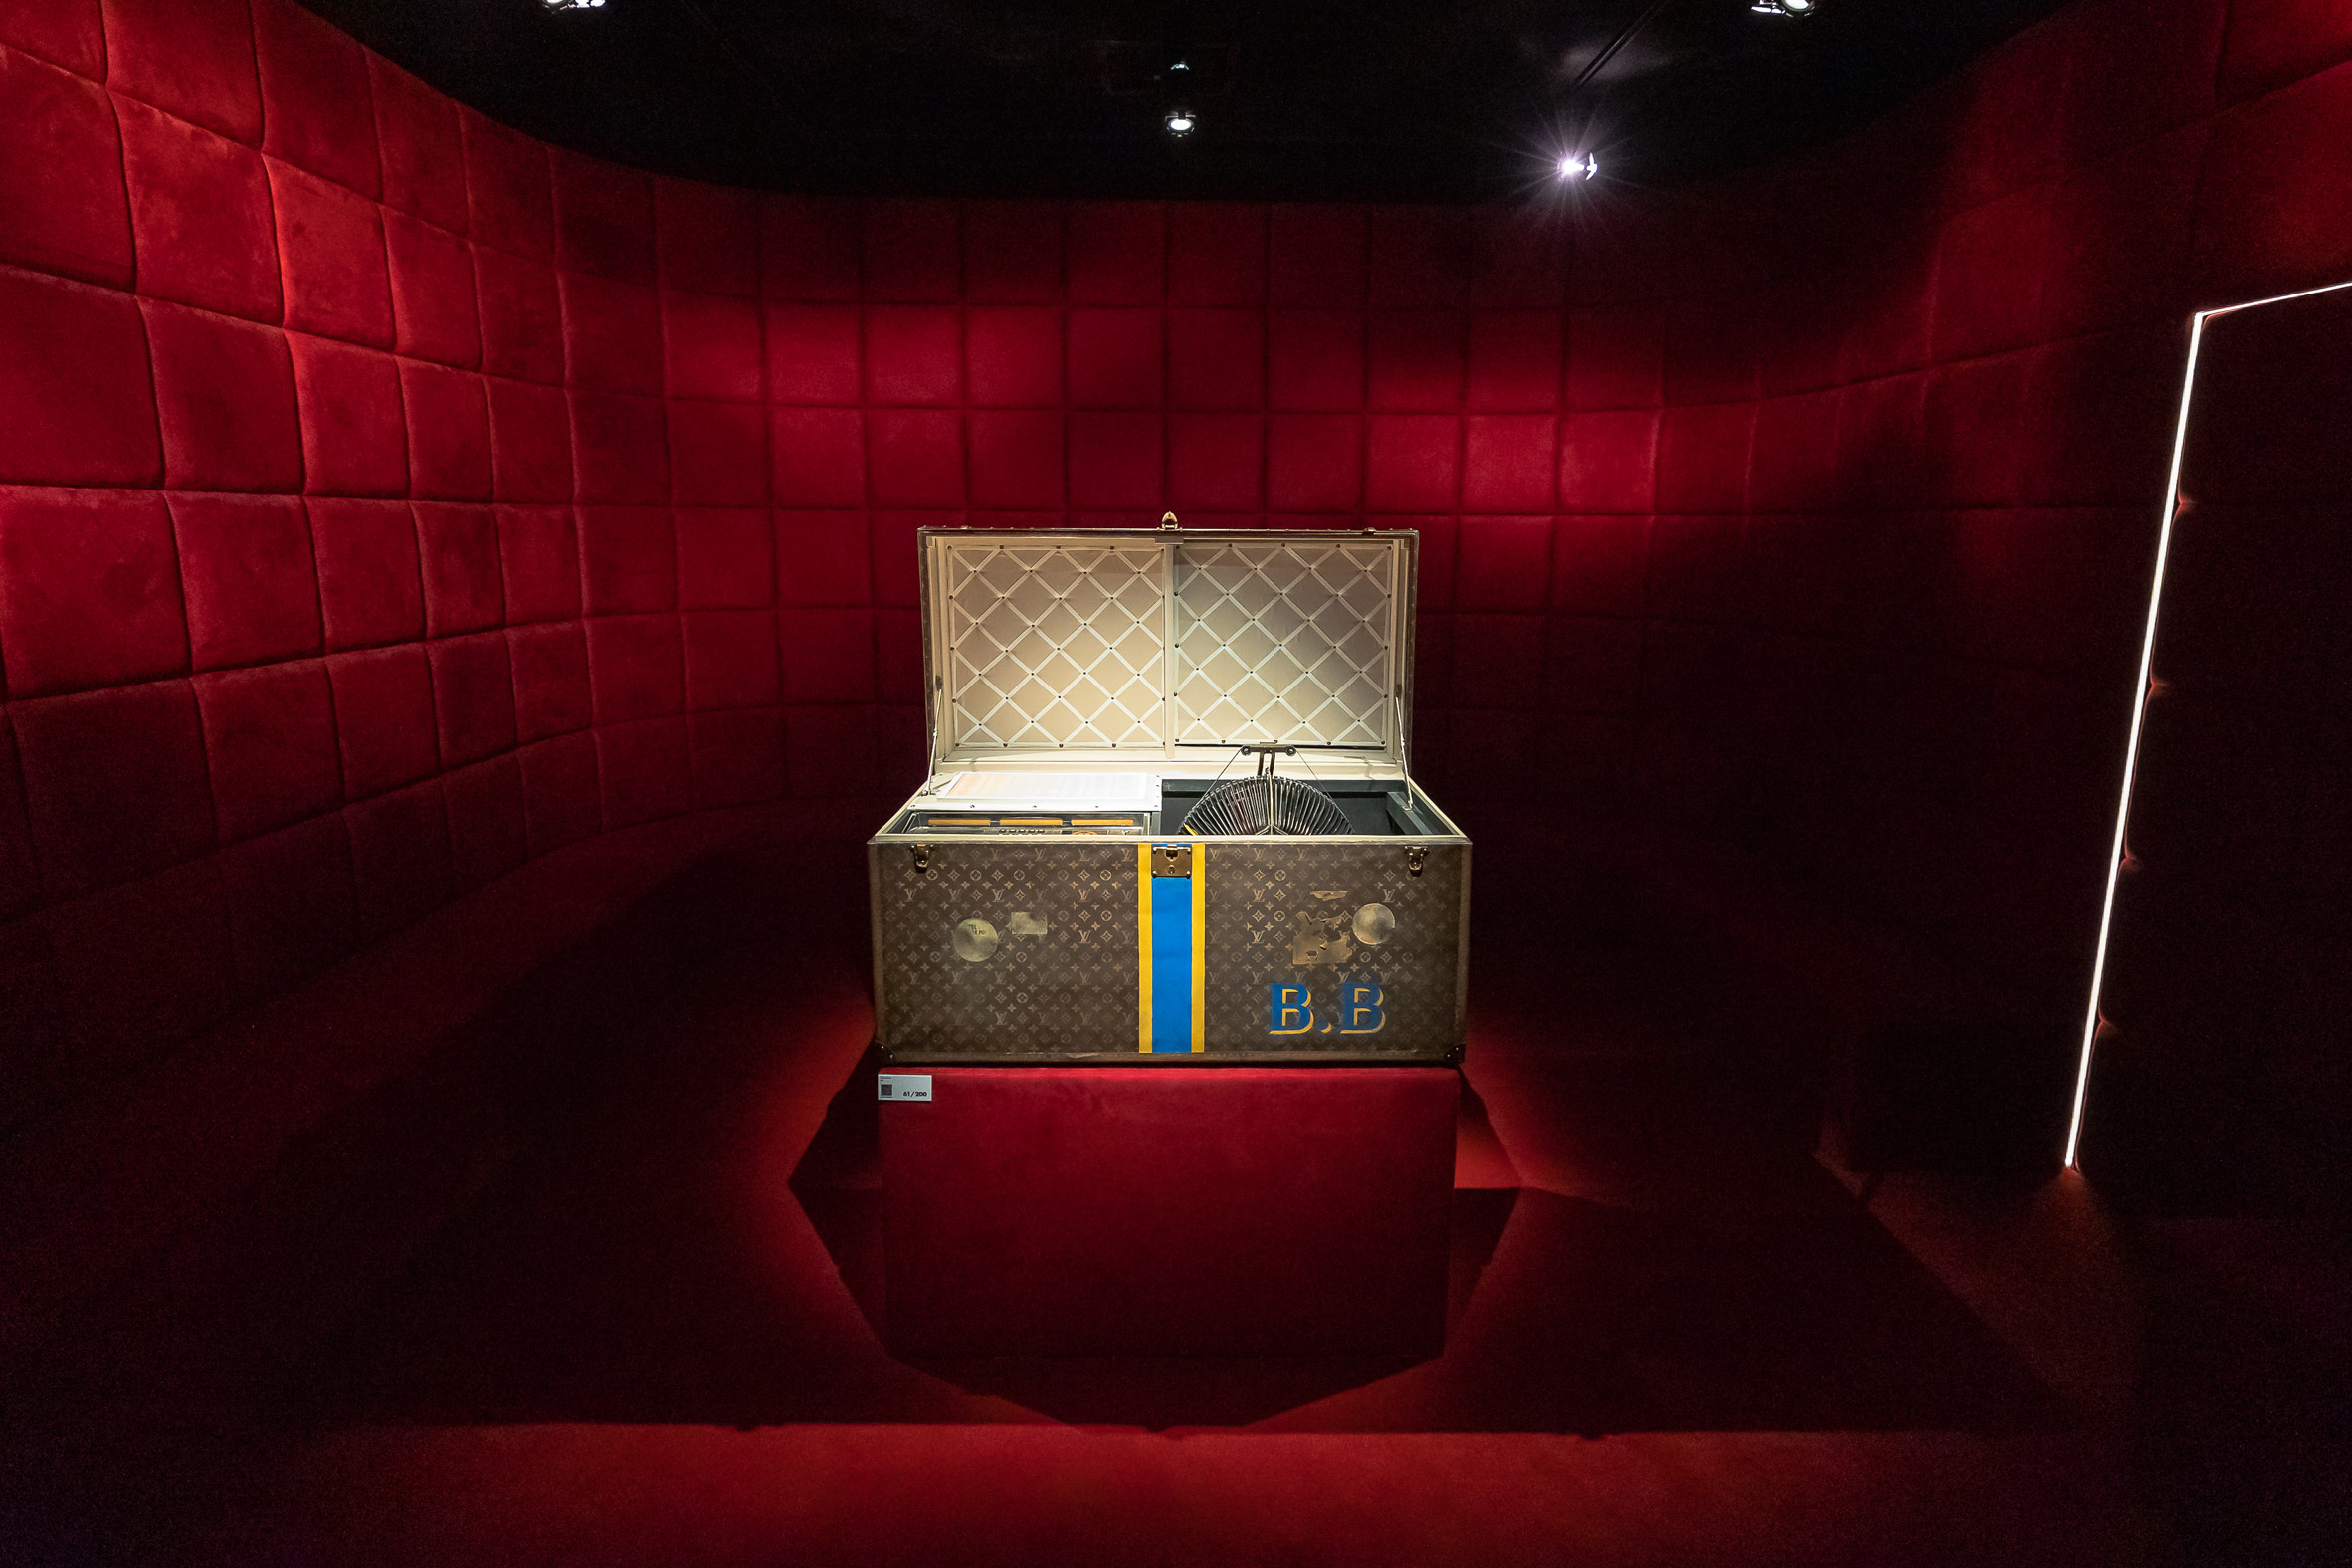 Designers and architects redesign the Louis Vuitton trunk for Louis 200